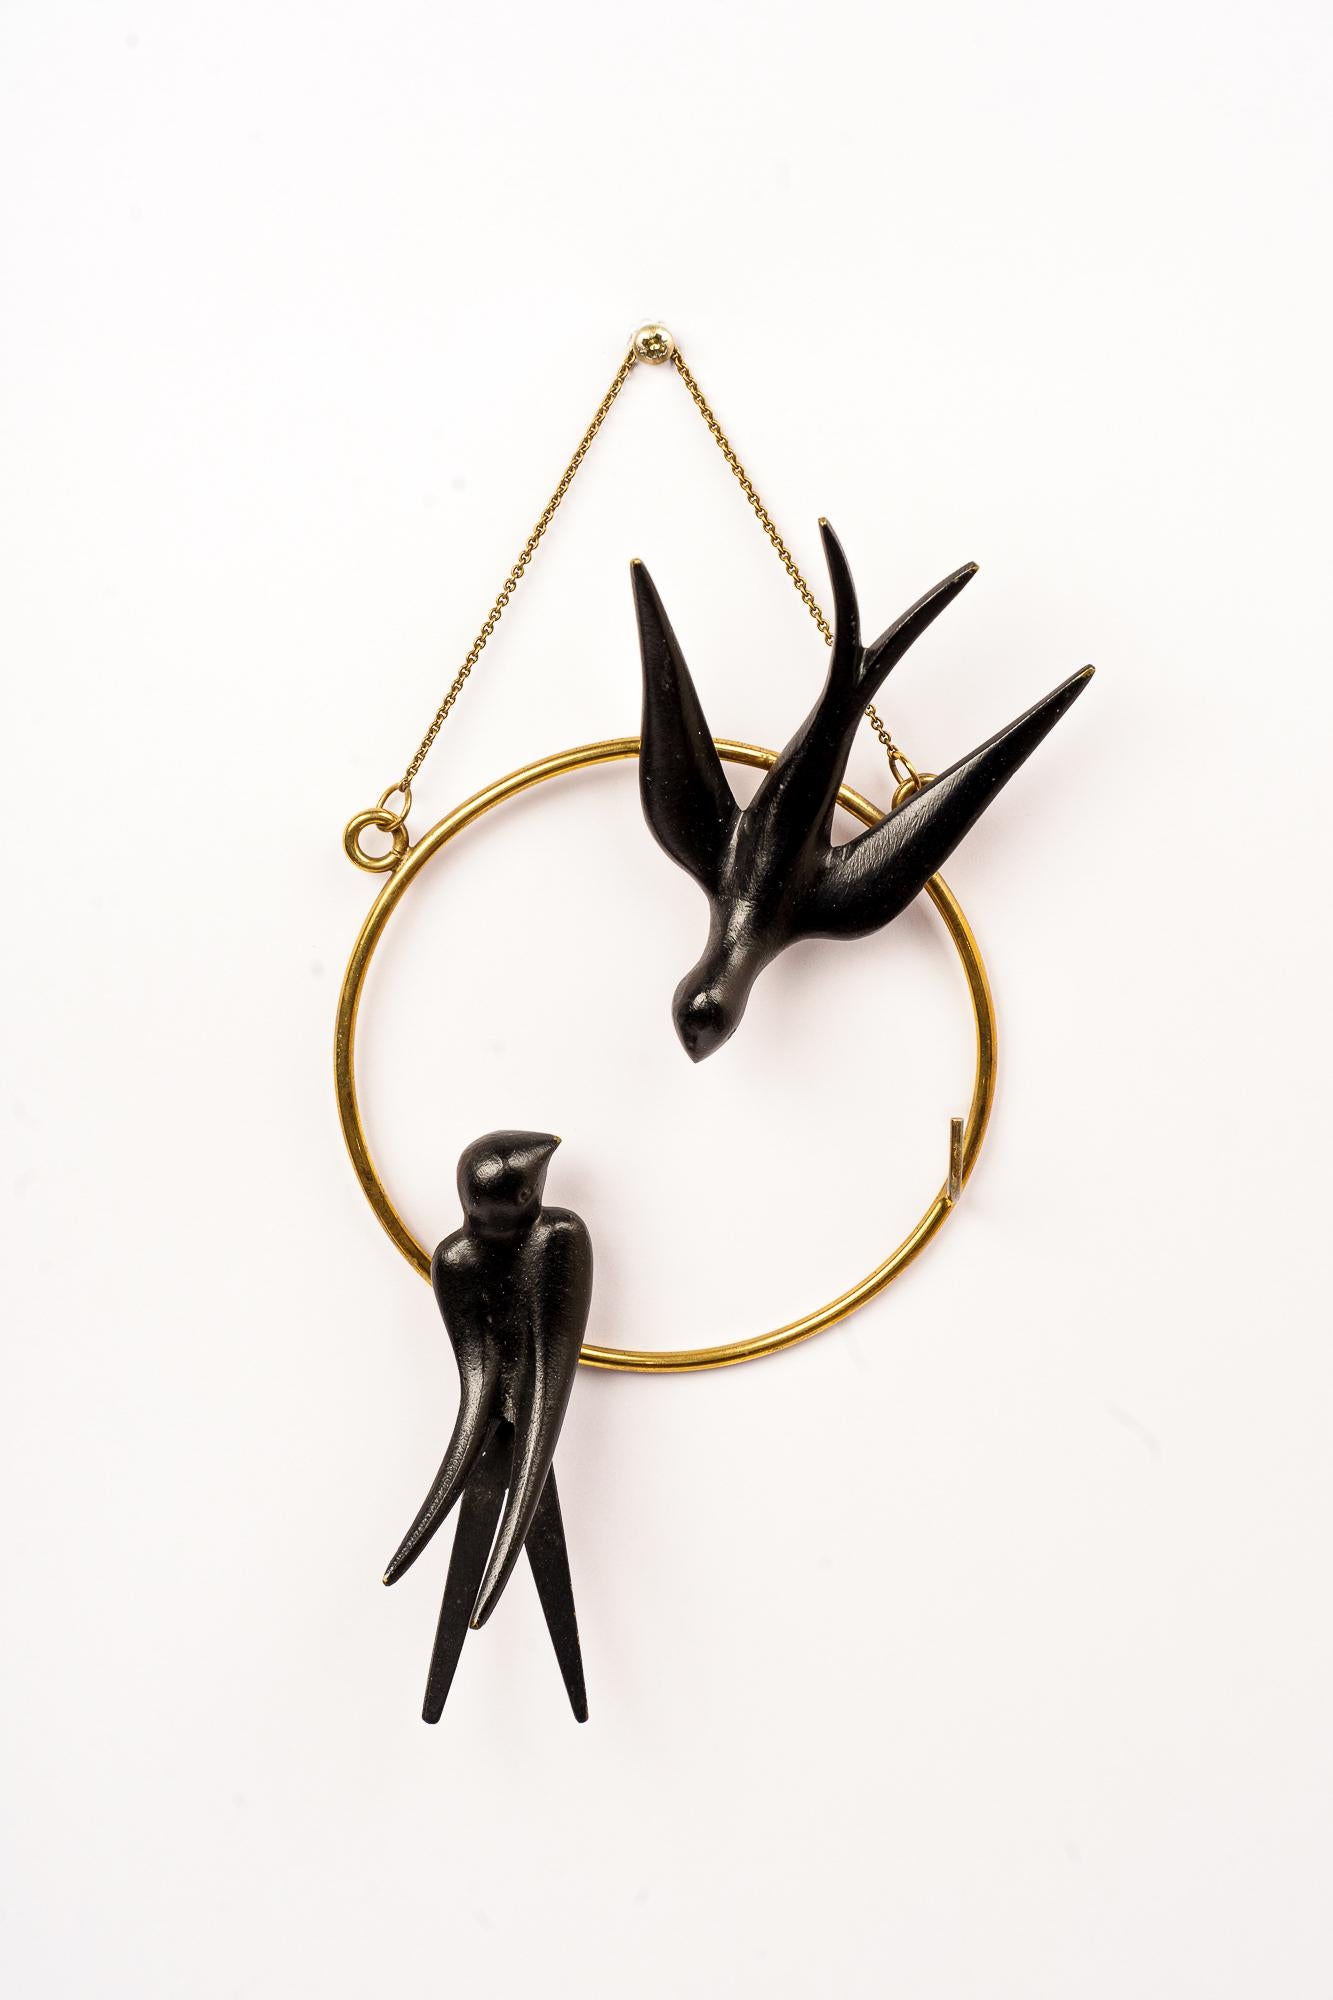 Walter bosse swallow birds key holder around 1950s
The key is not included ( only for the photoshooting ).